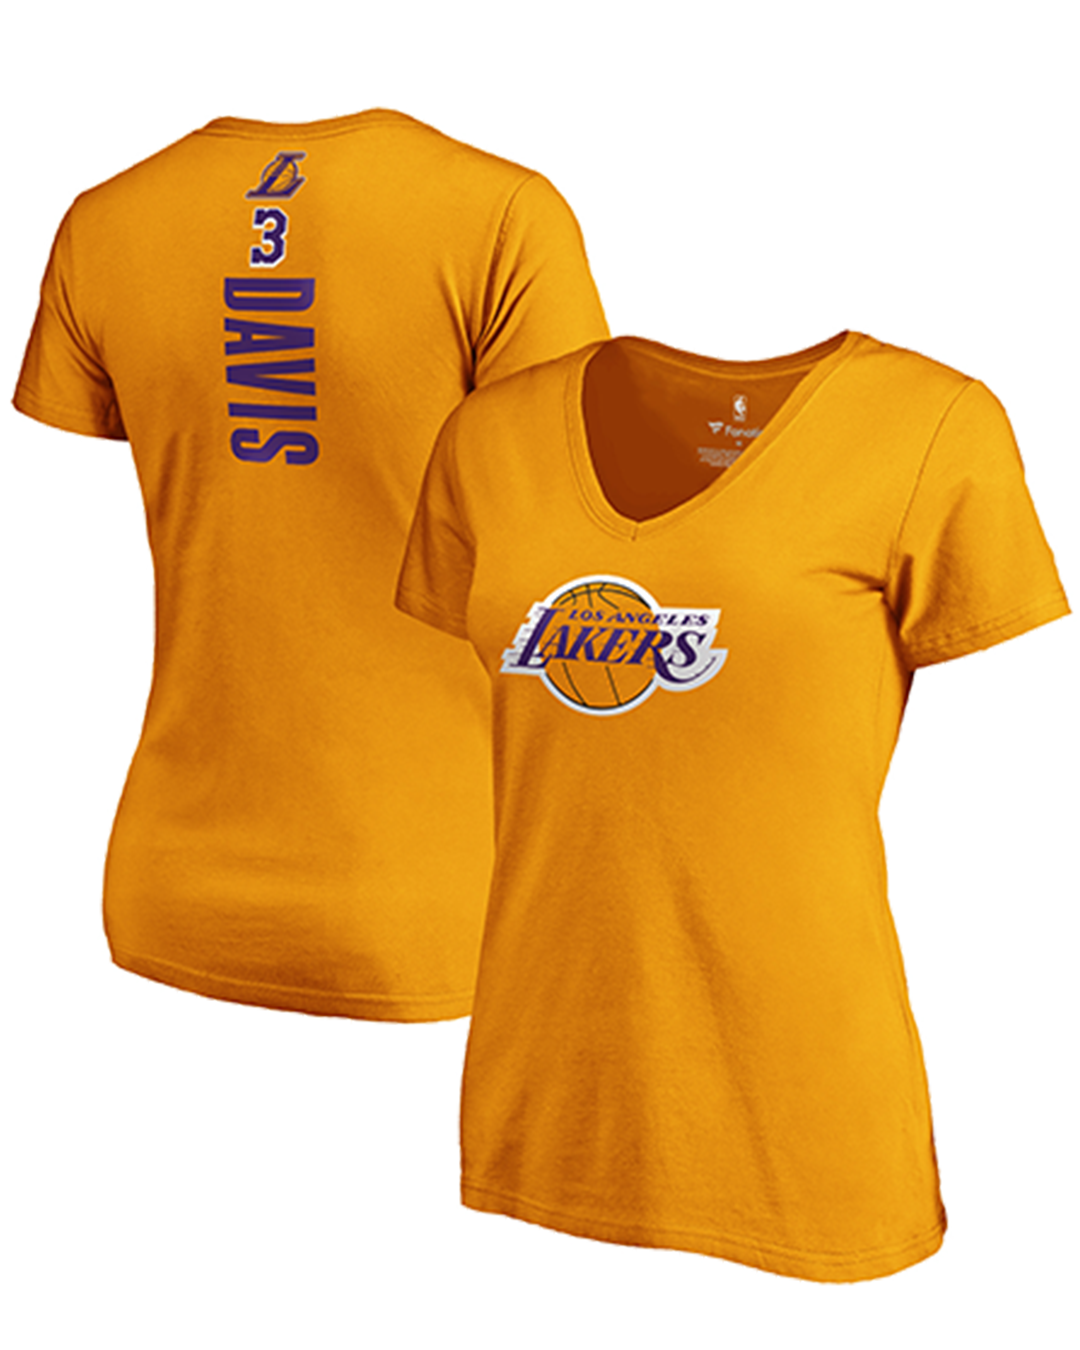 Lakers Anthony Davis 75th Anniversary Authentic Icon Jersey – Lakers Store